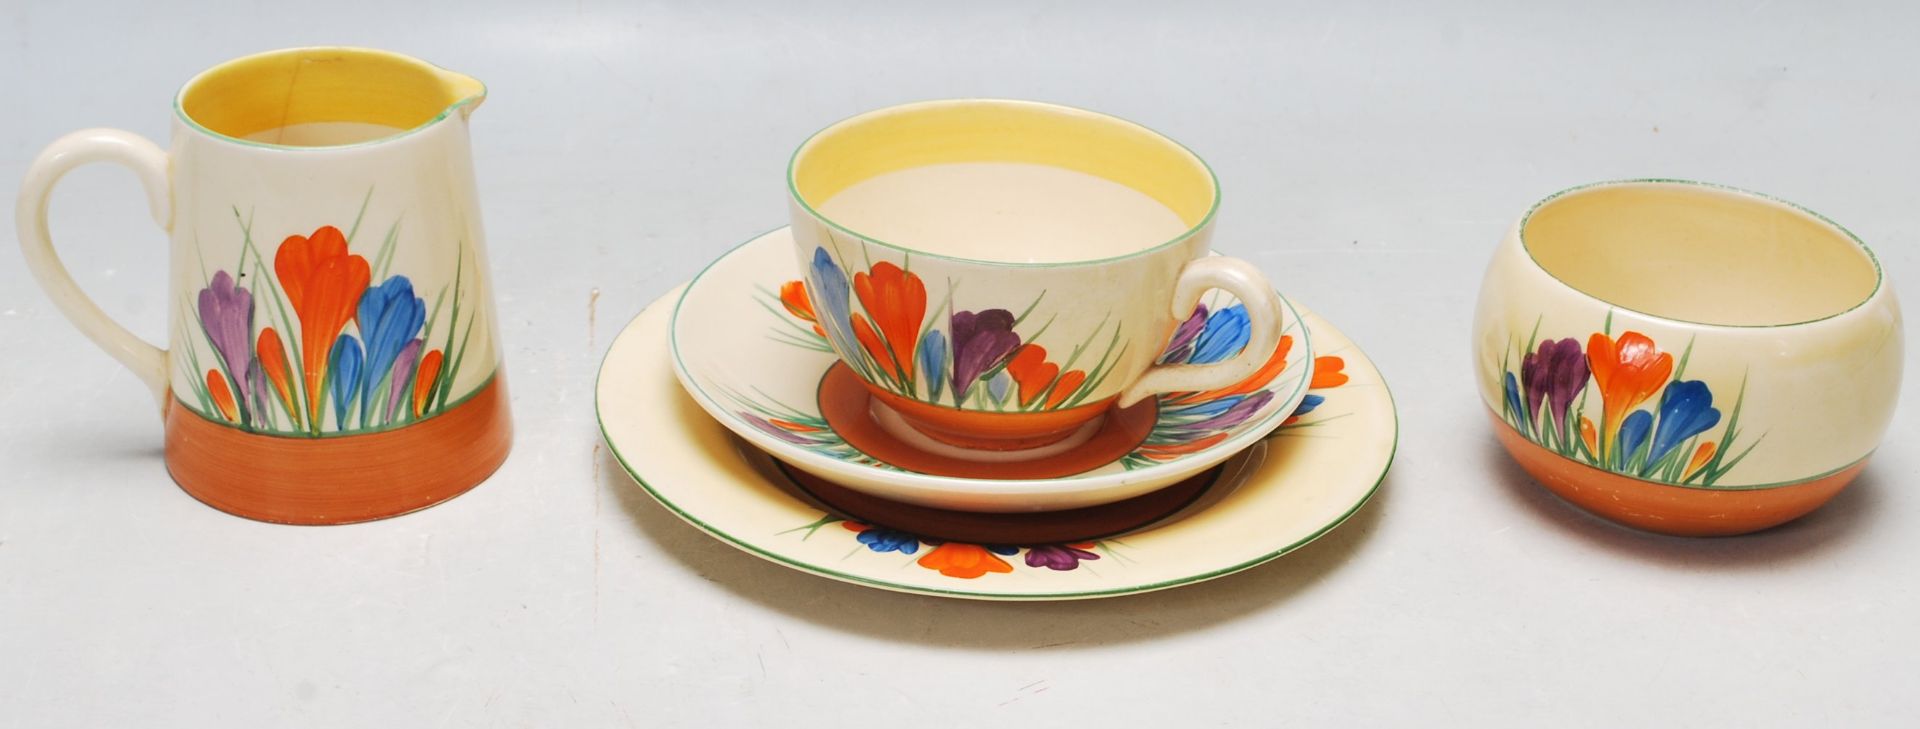 FIVE PIECES OF 1920’S BIZARRE BY CLARICE CLIFF WARE